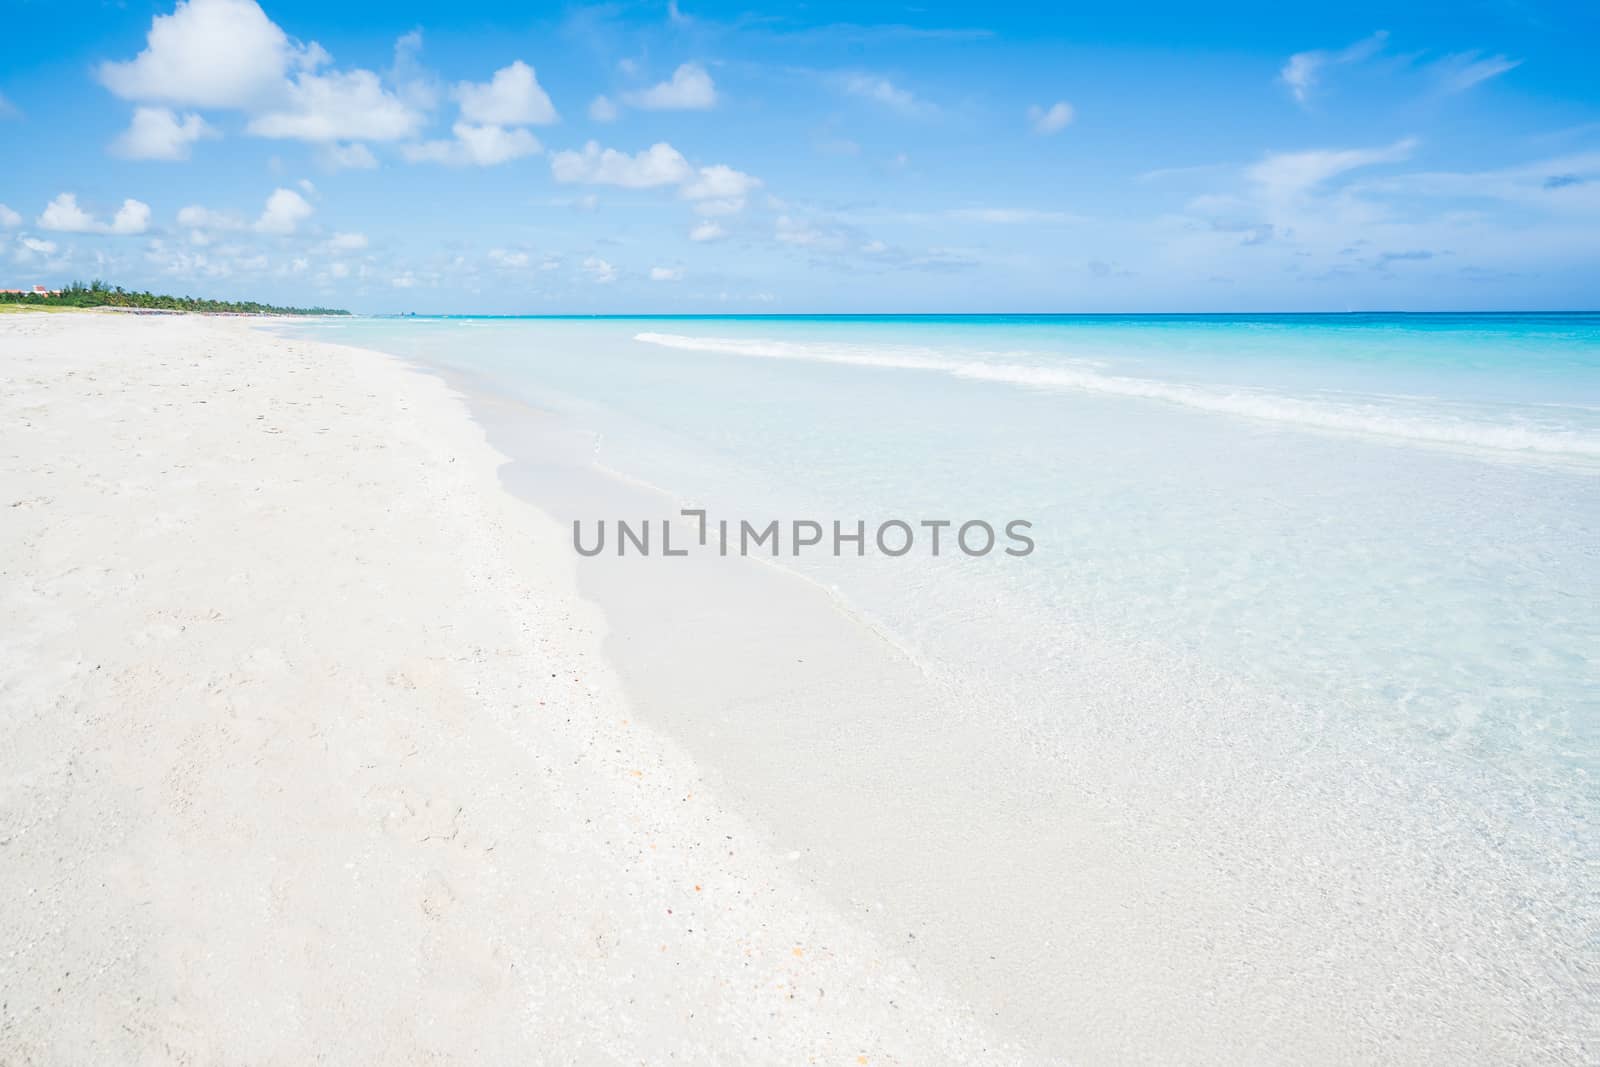 Awesome beach of Varadero during a sunny day, fine white sand and turquoise and blue Caribbean sea,sky with clouds,Cuba.